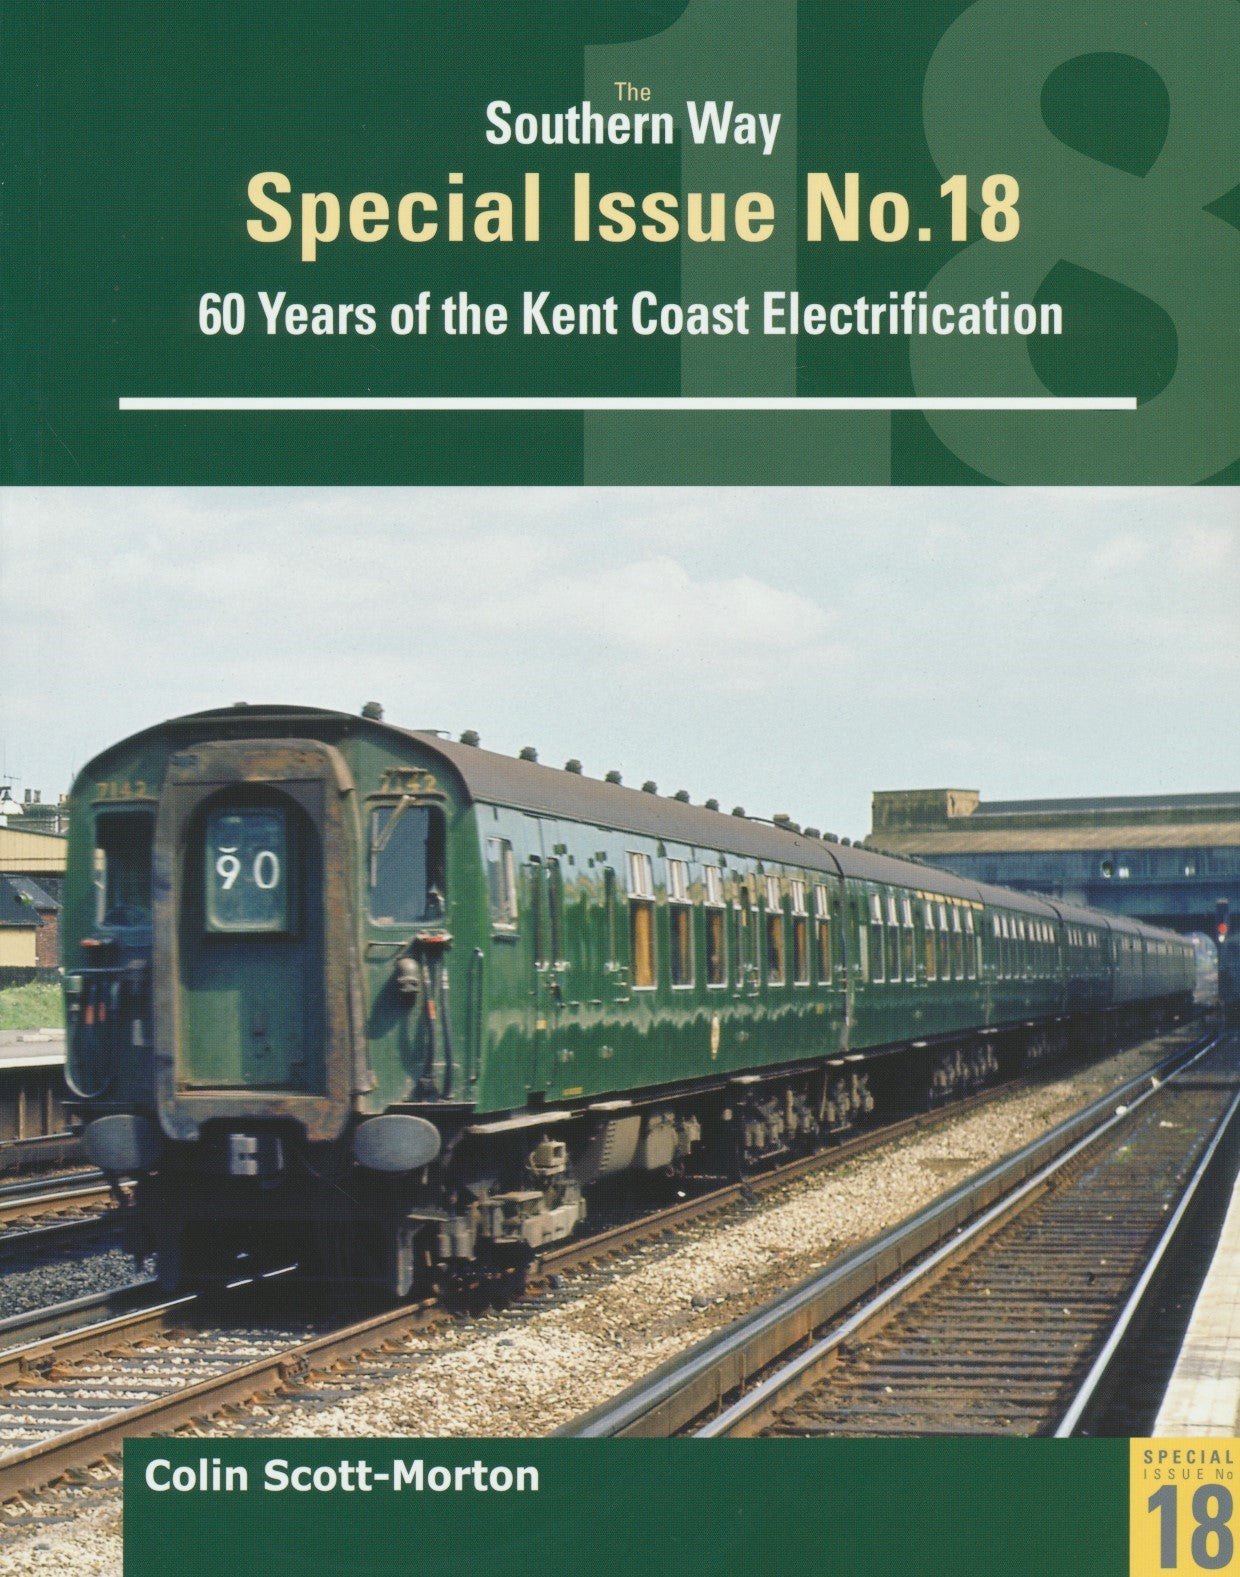 Southern Way Special Issue No. 18: 60 Years of the Kent Coast Electrification